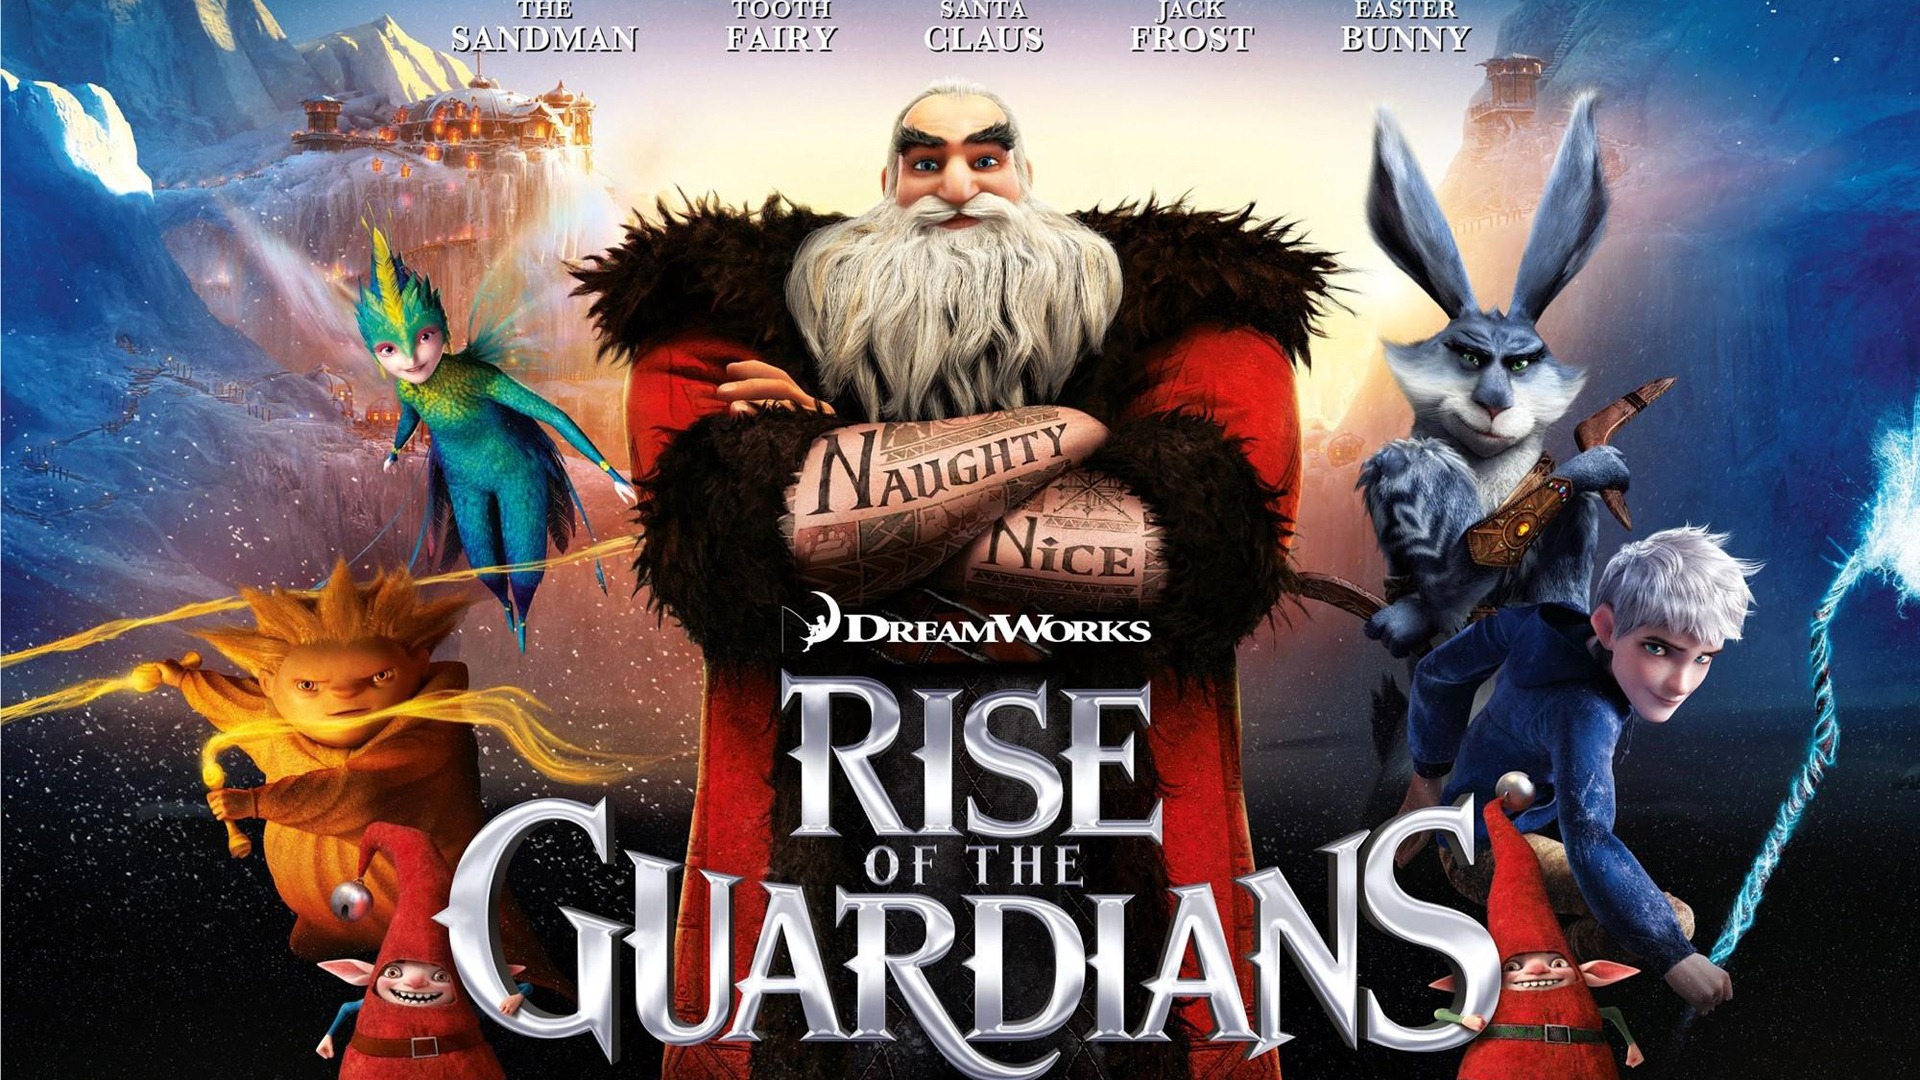 Rise of the Guardians HD wallpapers #11 - 1920x1080